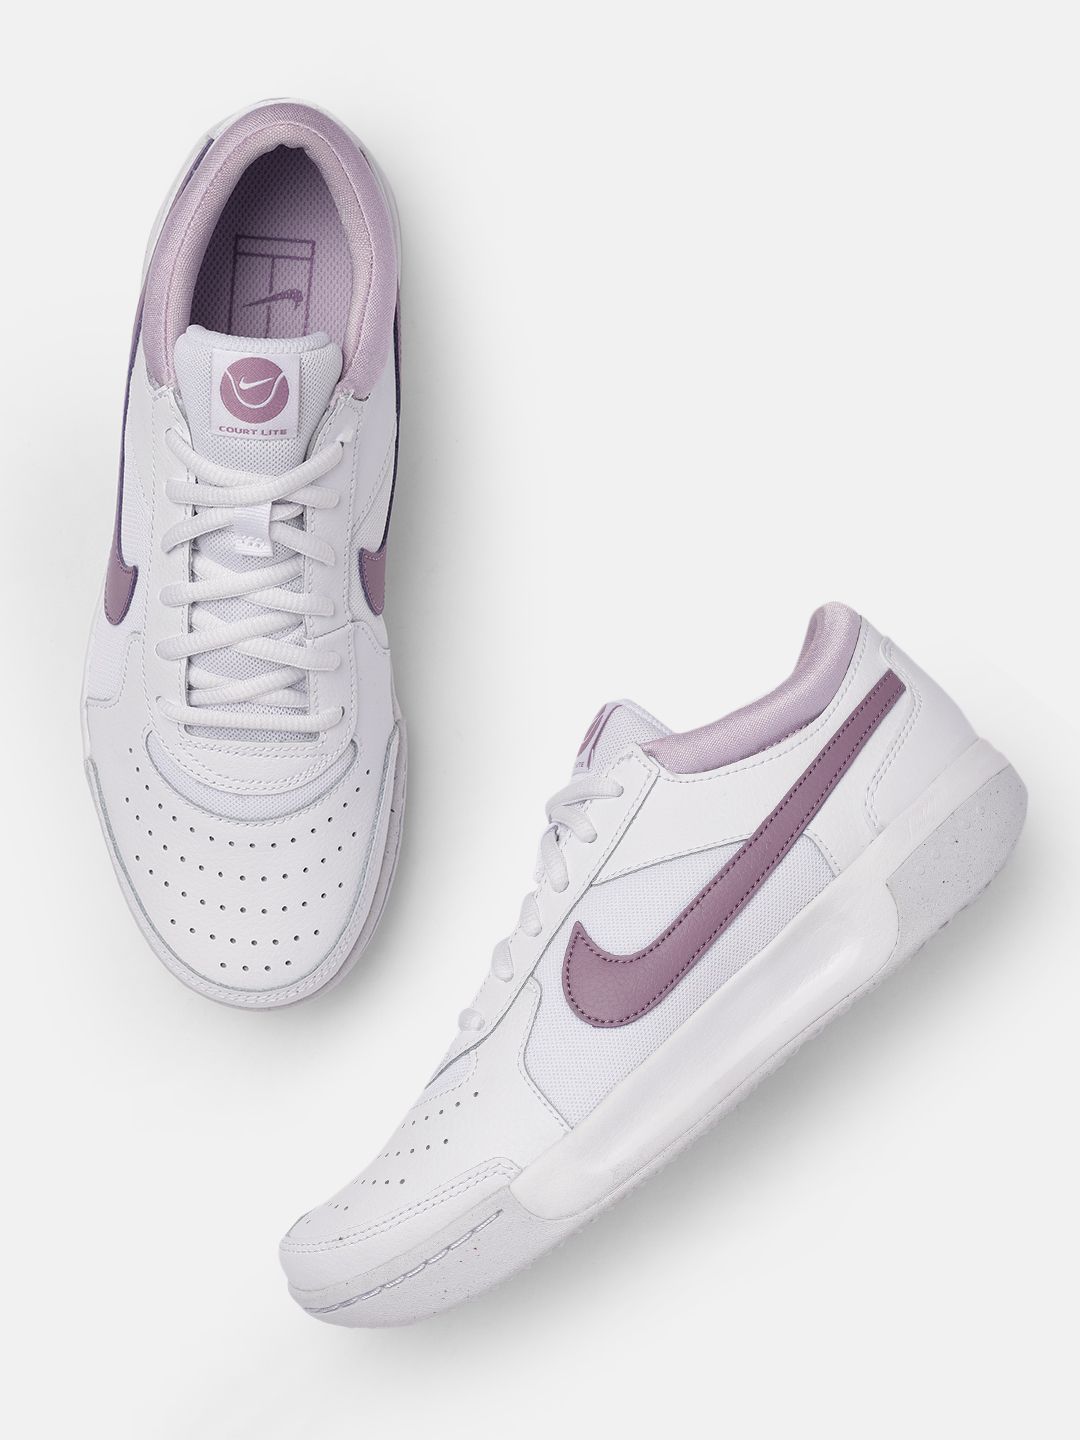 Nike Women White Leather Zoom Court Lite 3 Leather Tennis Shoes Price in India